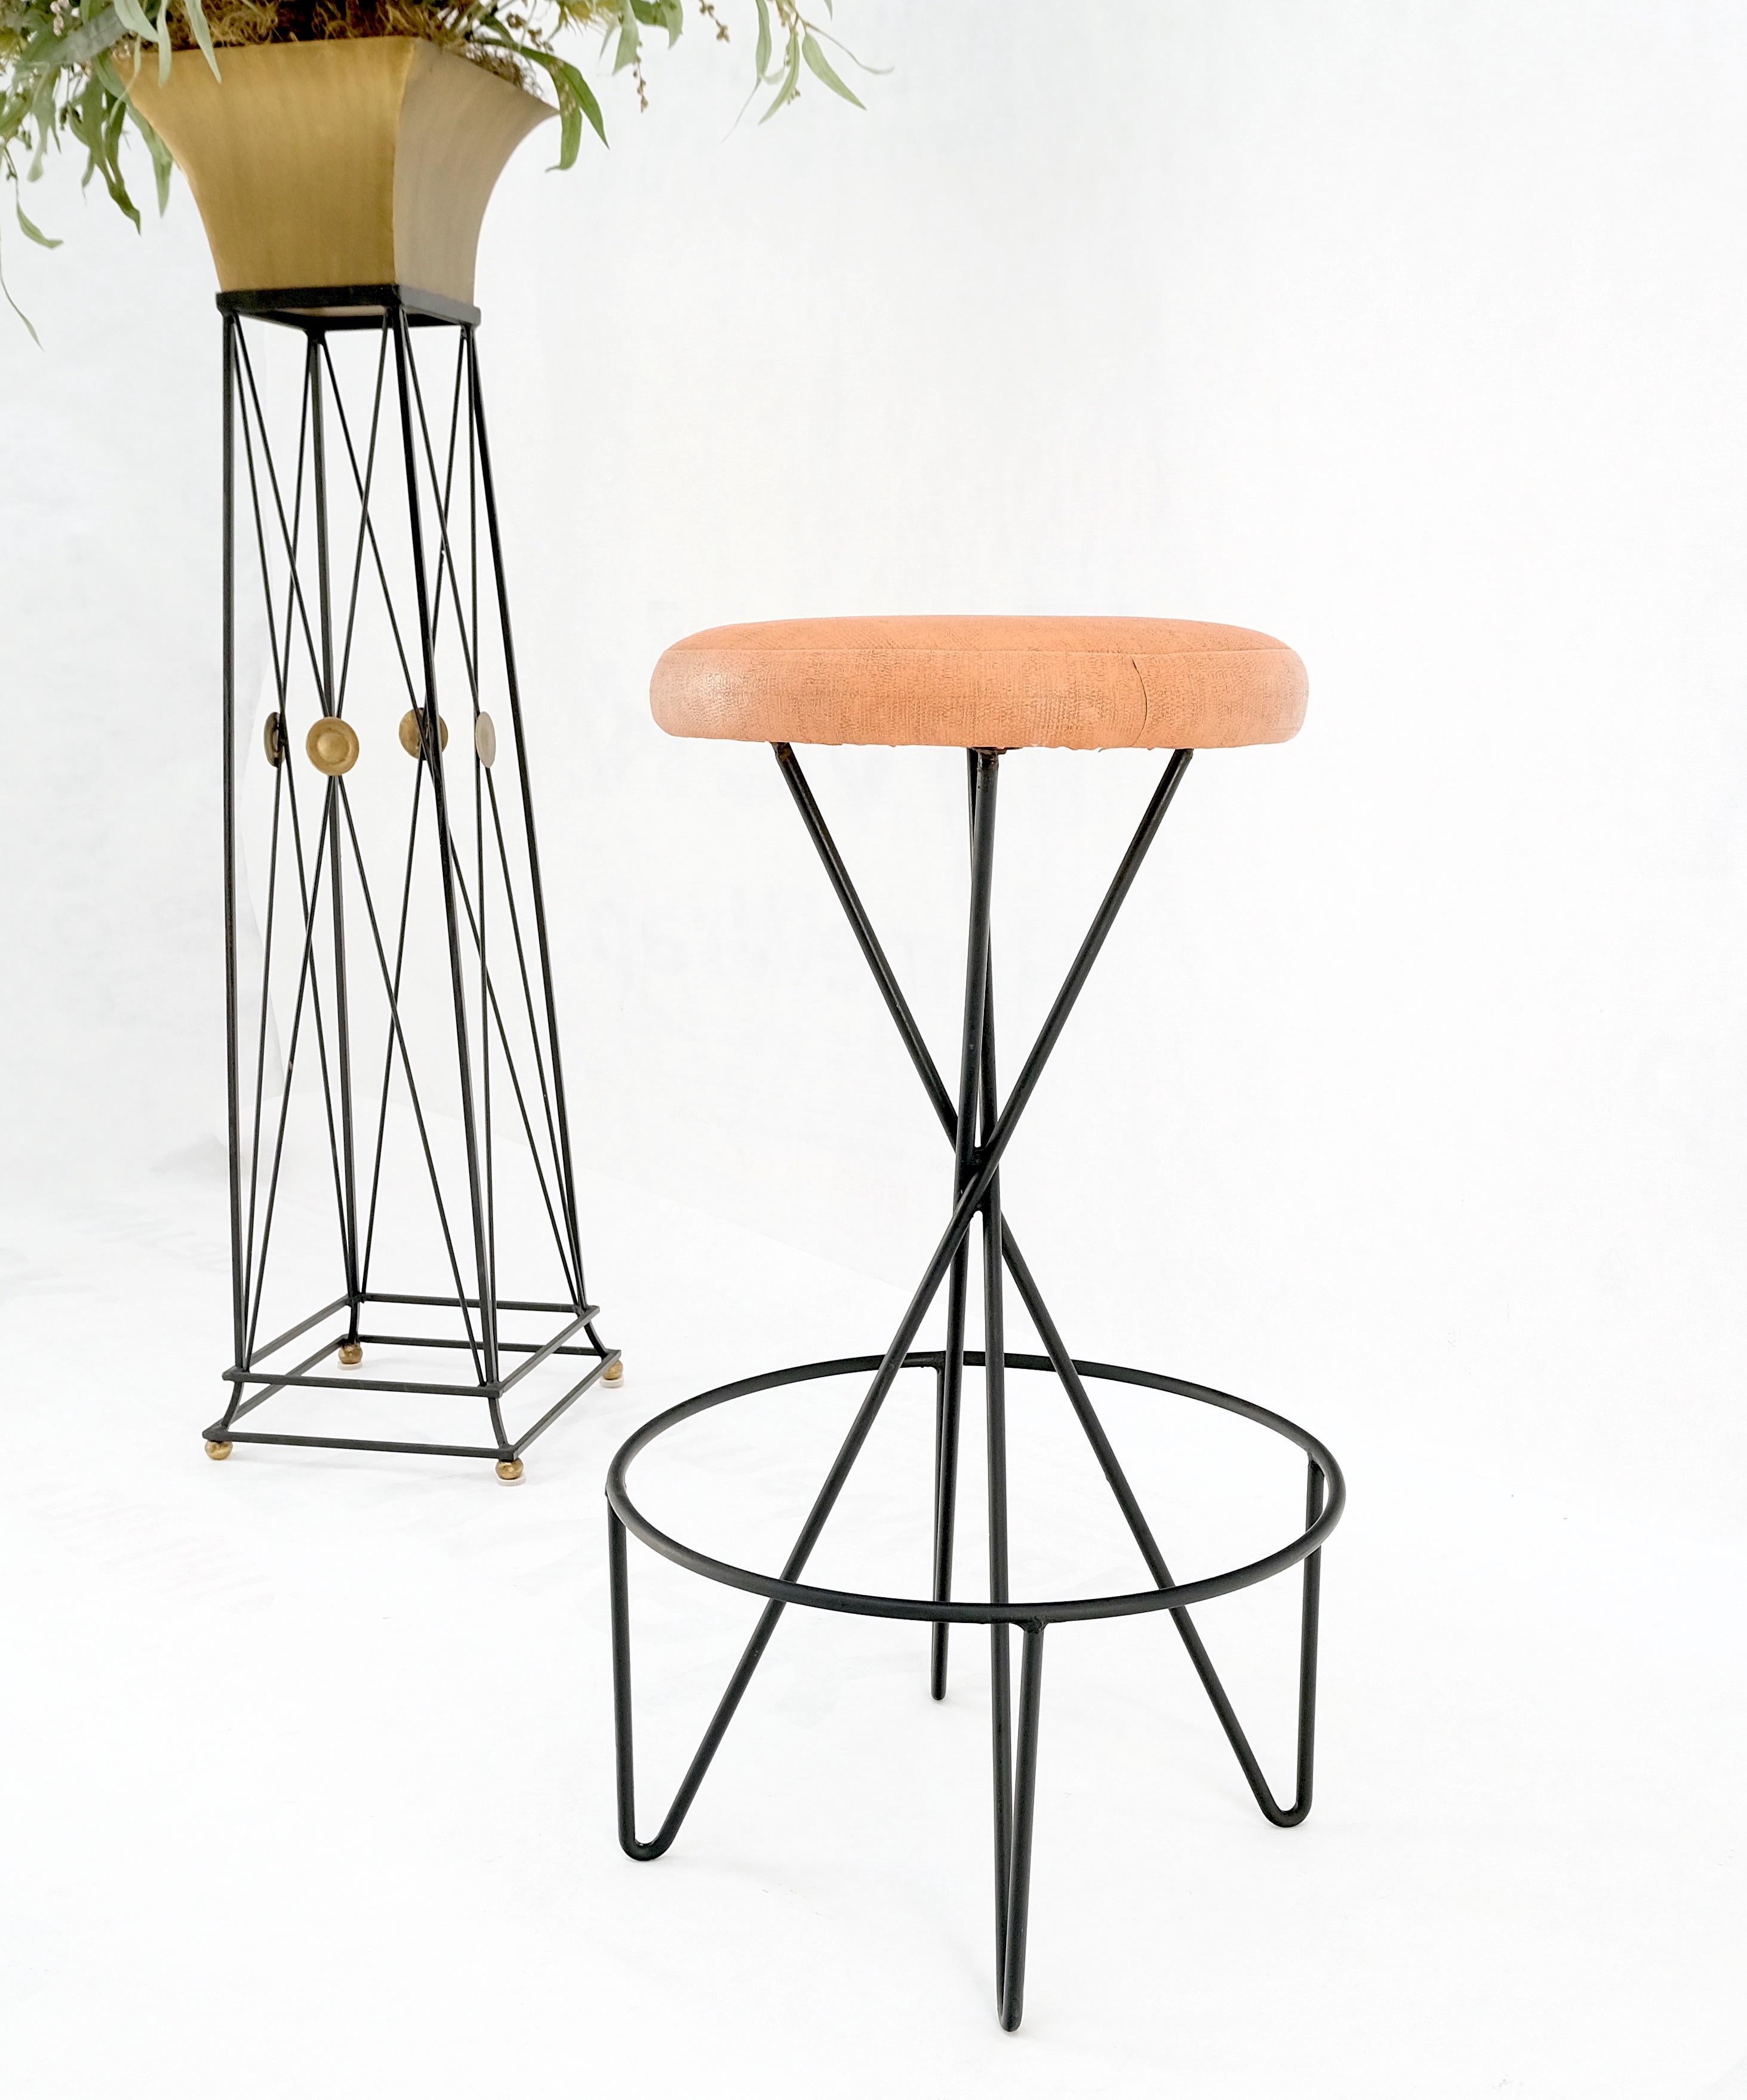 Painted Frederick Weiberg Mid-Century Modern Wire Base Round Seat Bar Stool, circa 1970s For Sale